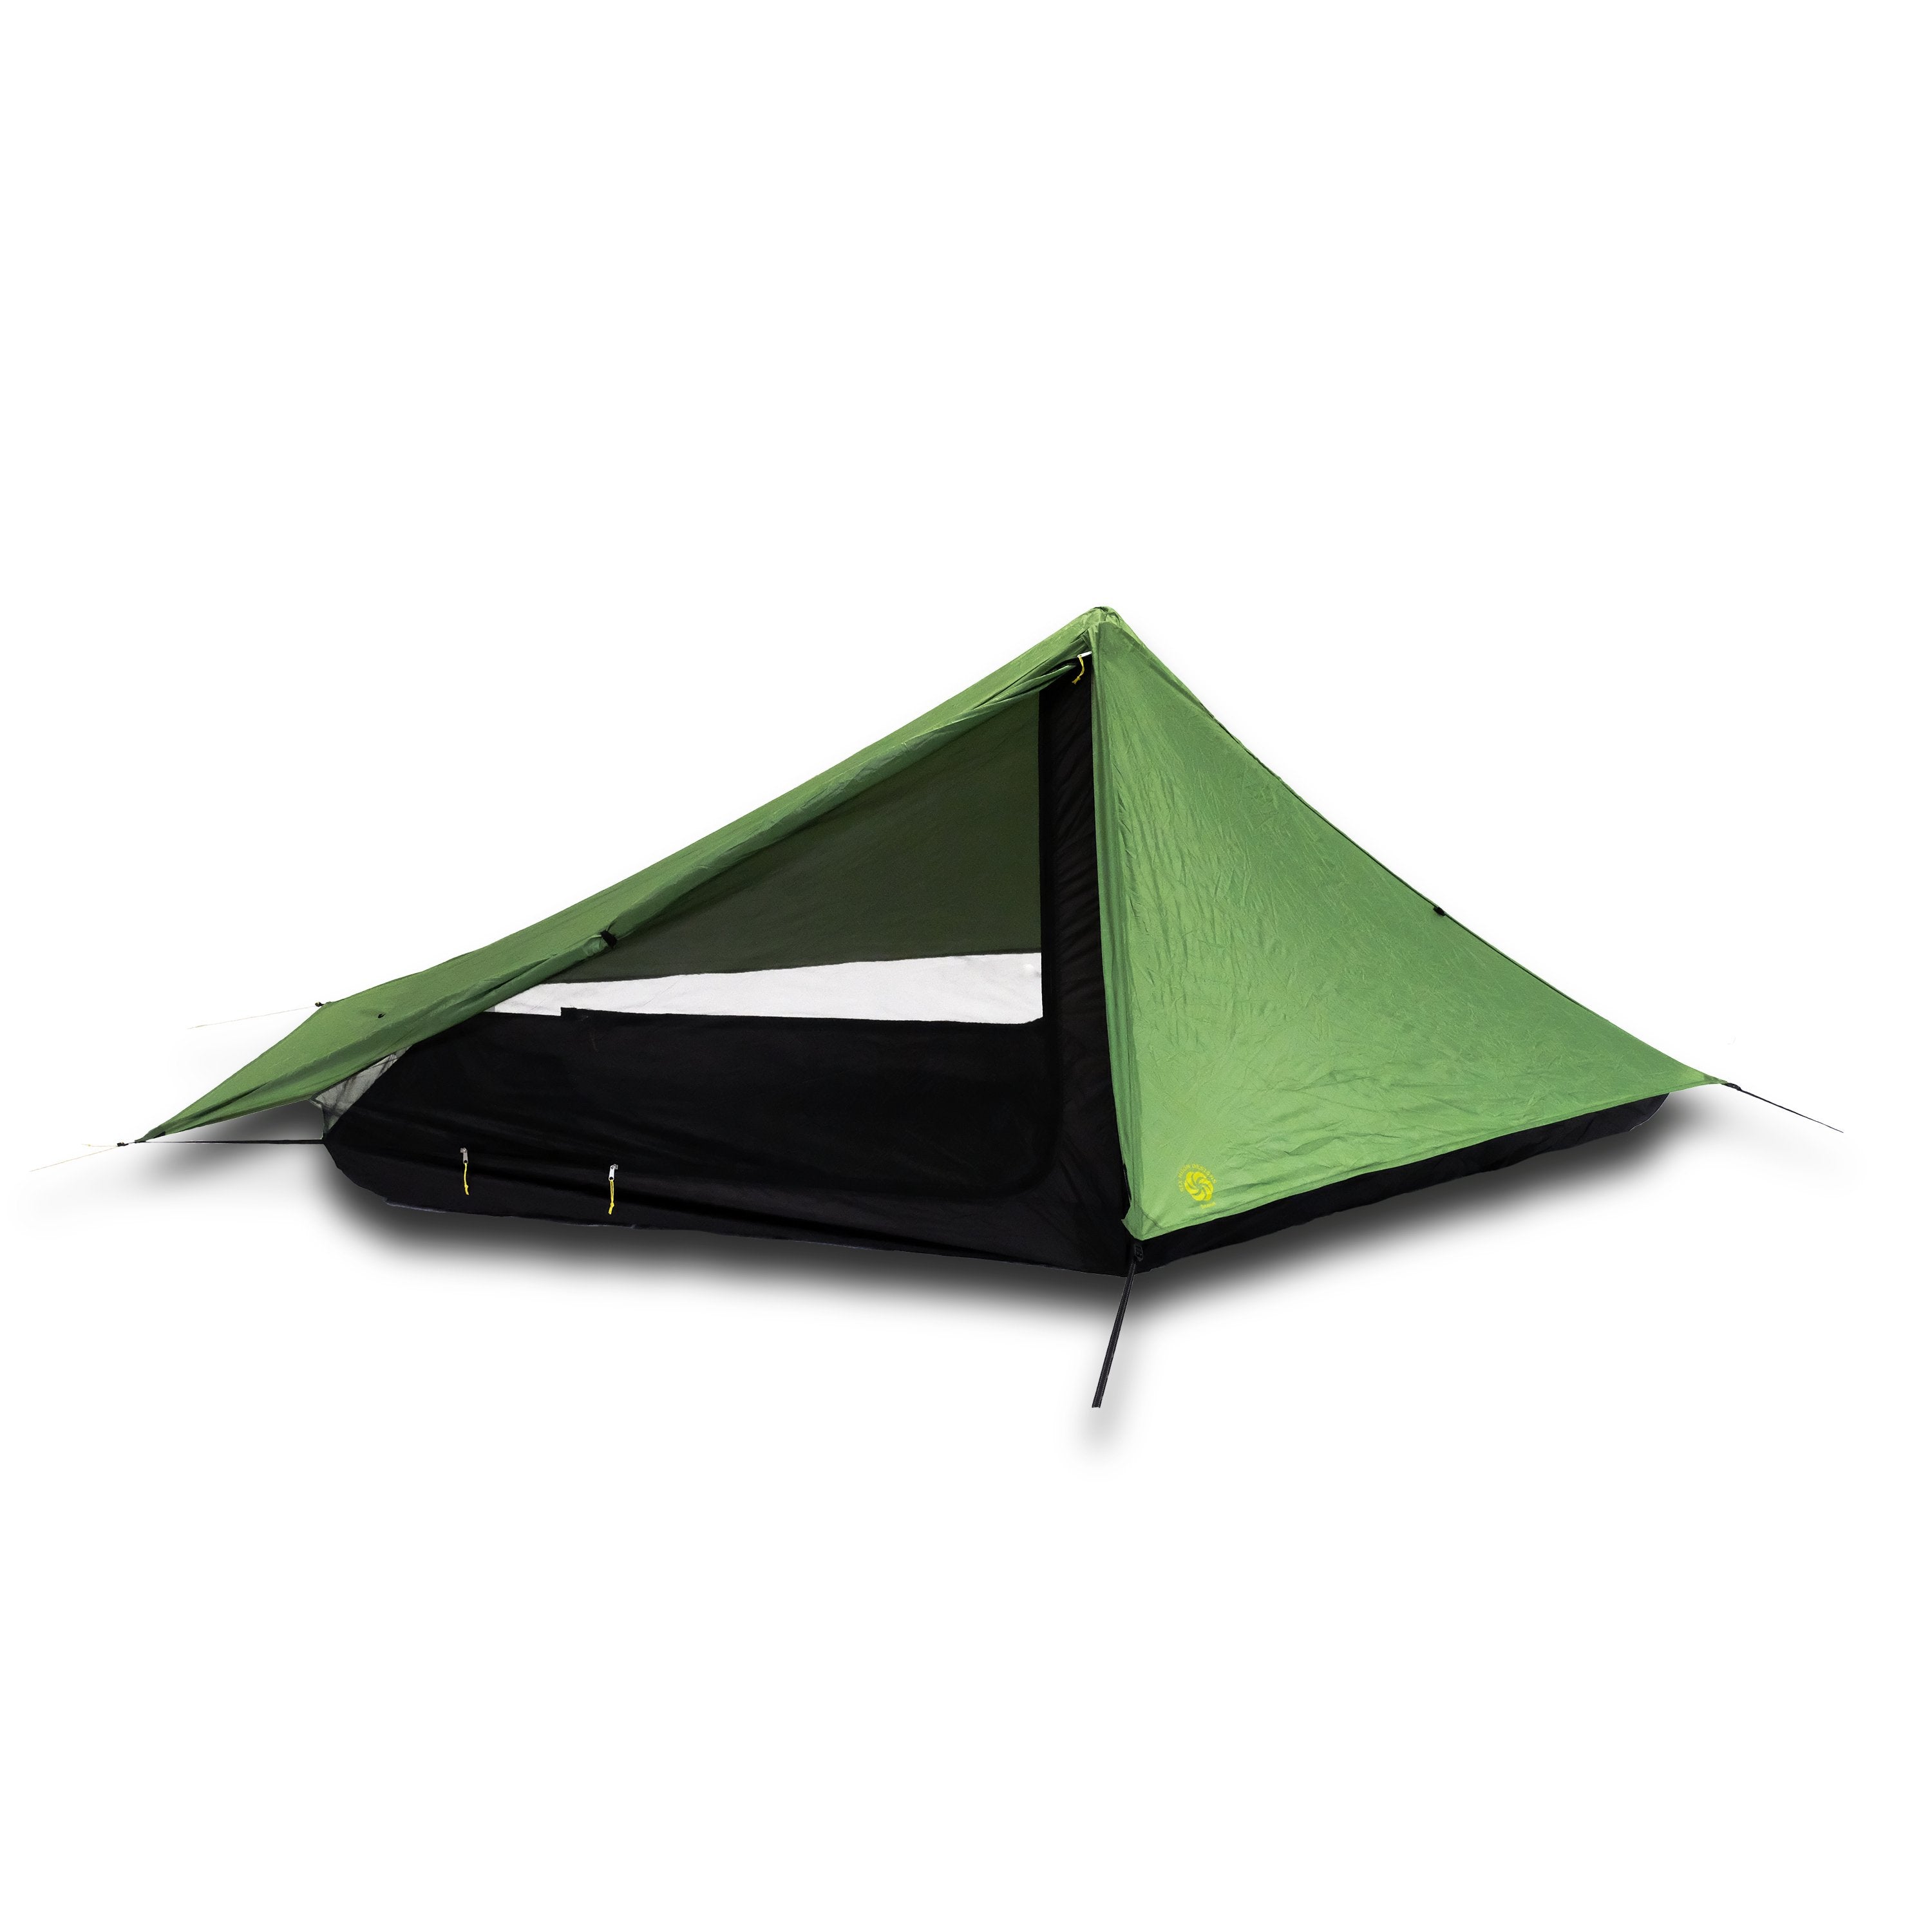 Skyscape Scout Ultralight 1 Person Tent with rear door open